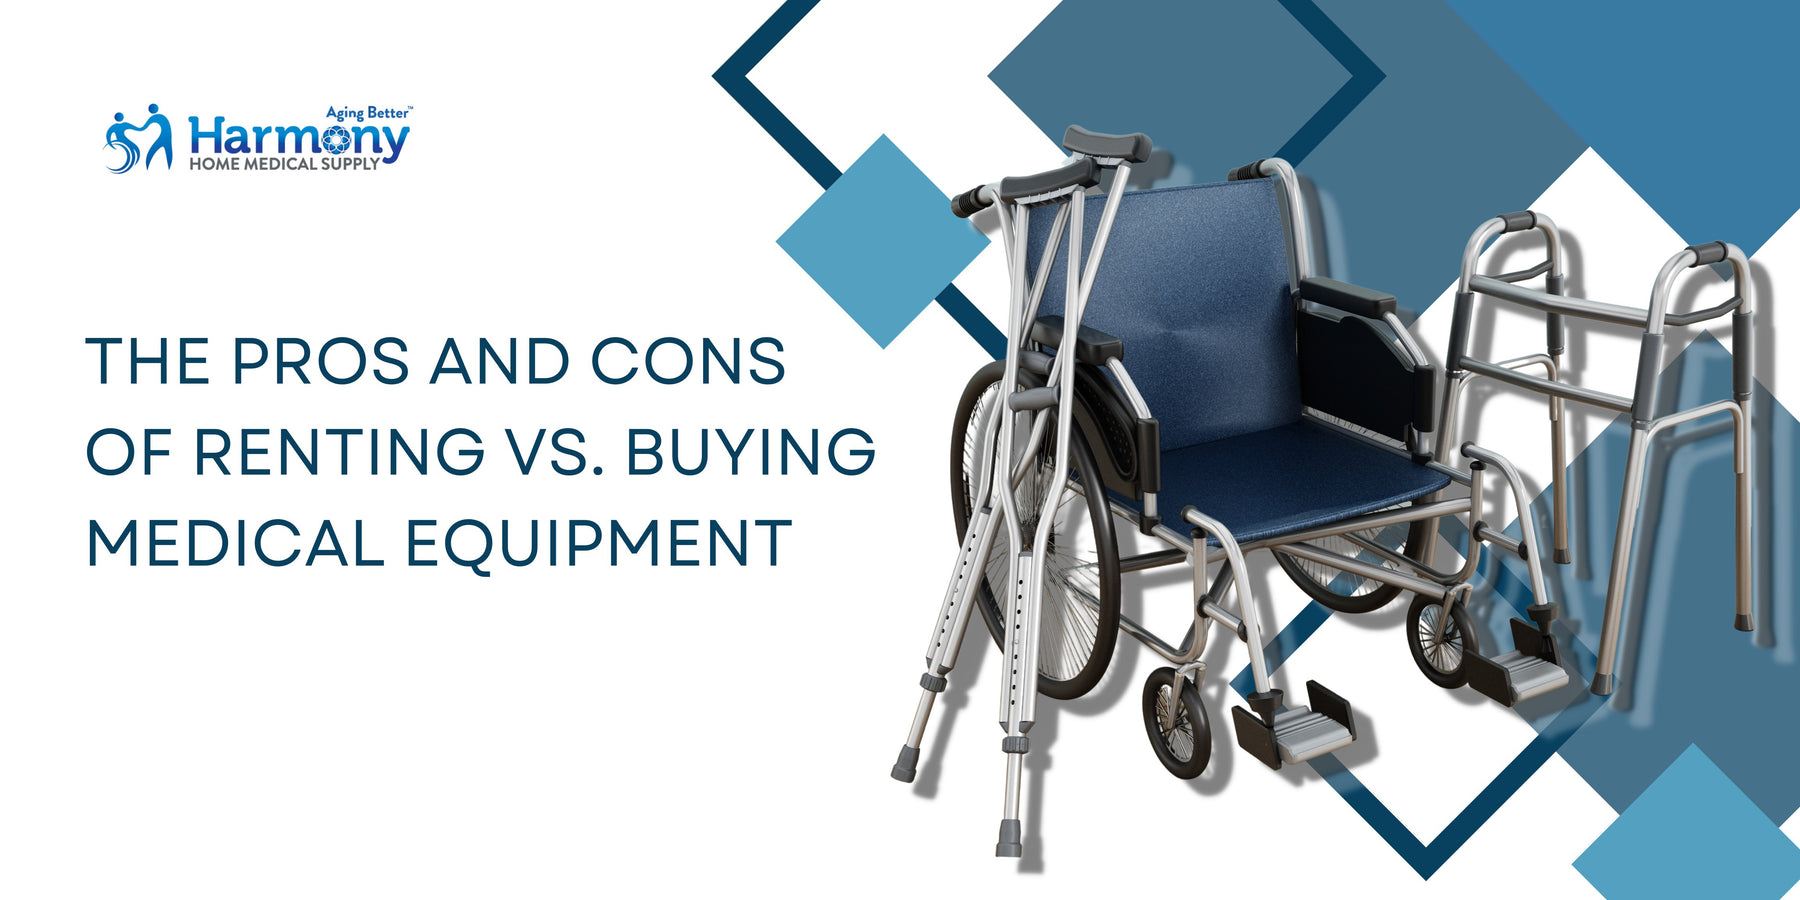 The Pros and Cons of Renting vs. Buying Medical Equipment - Harmony Home Medical Supply